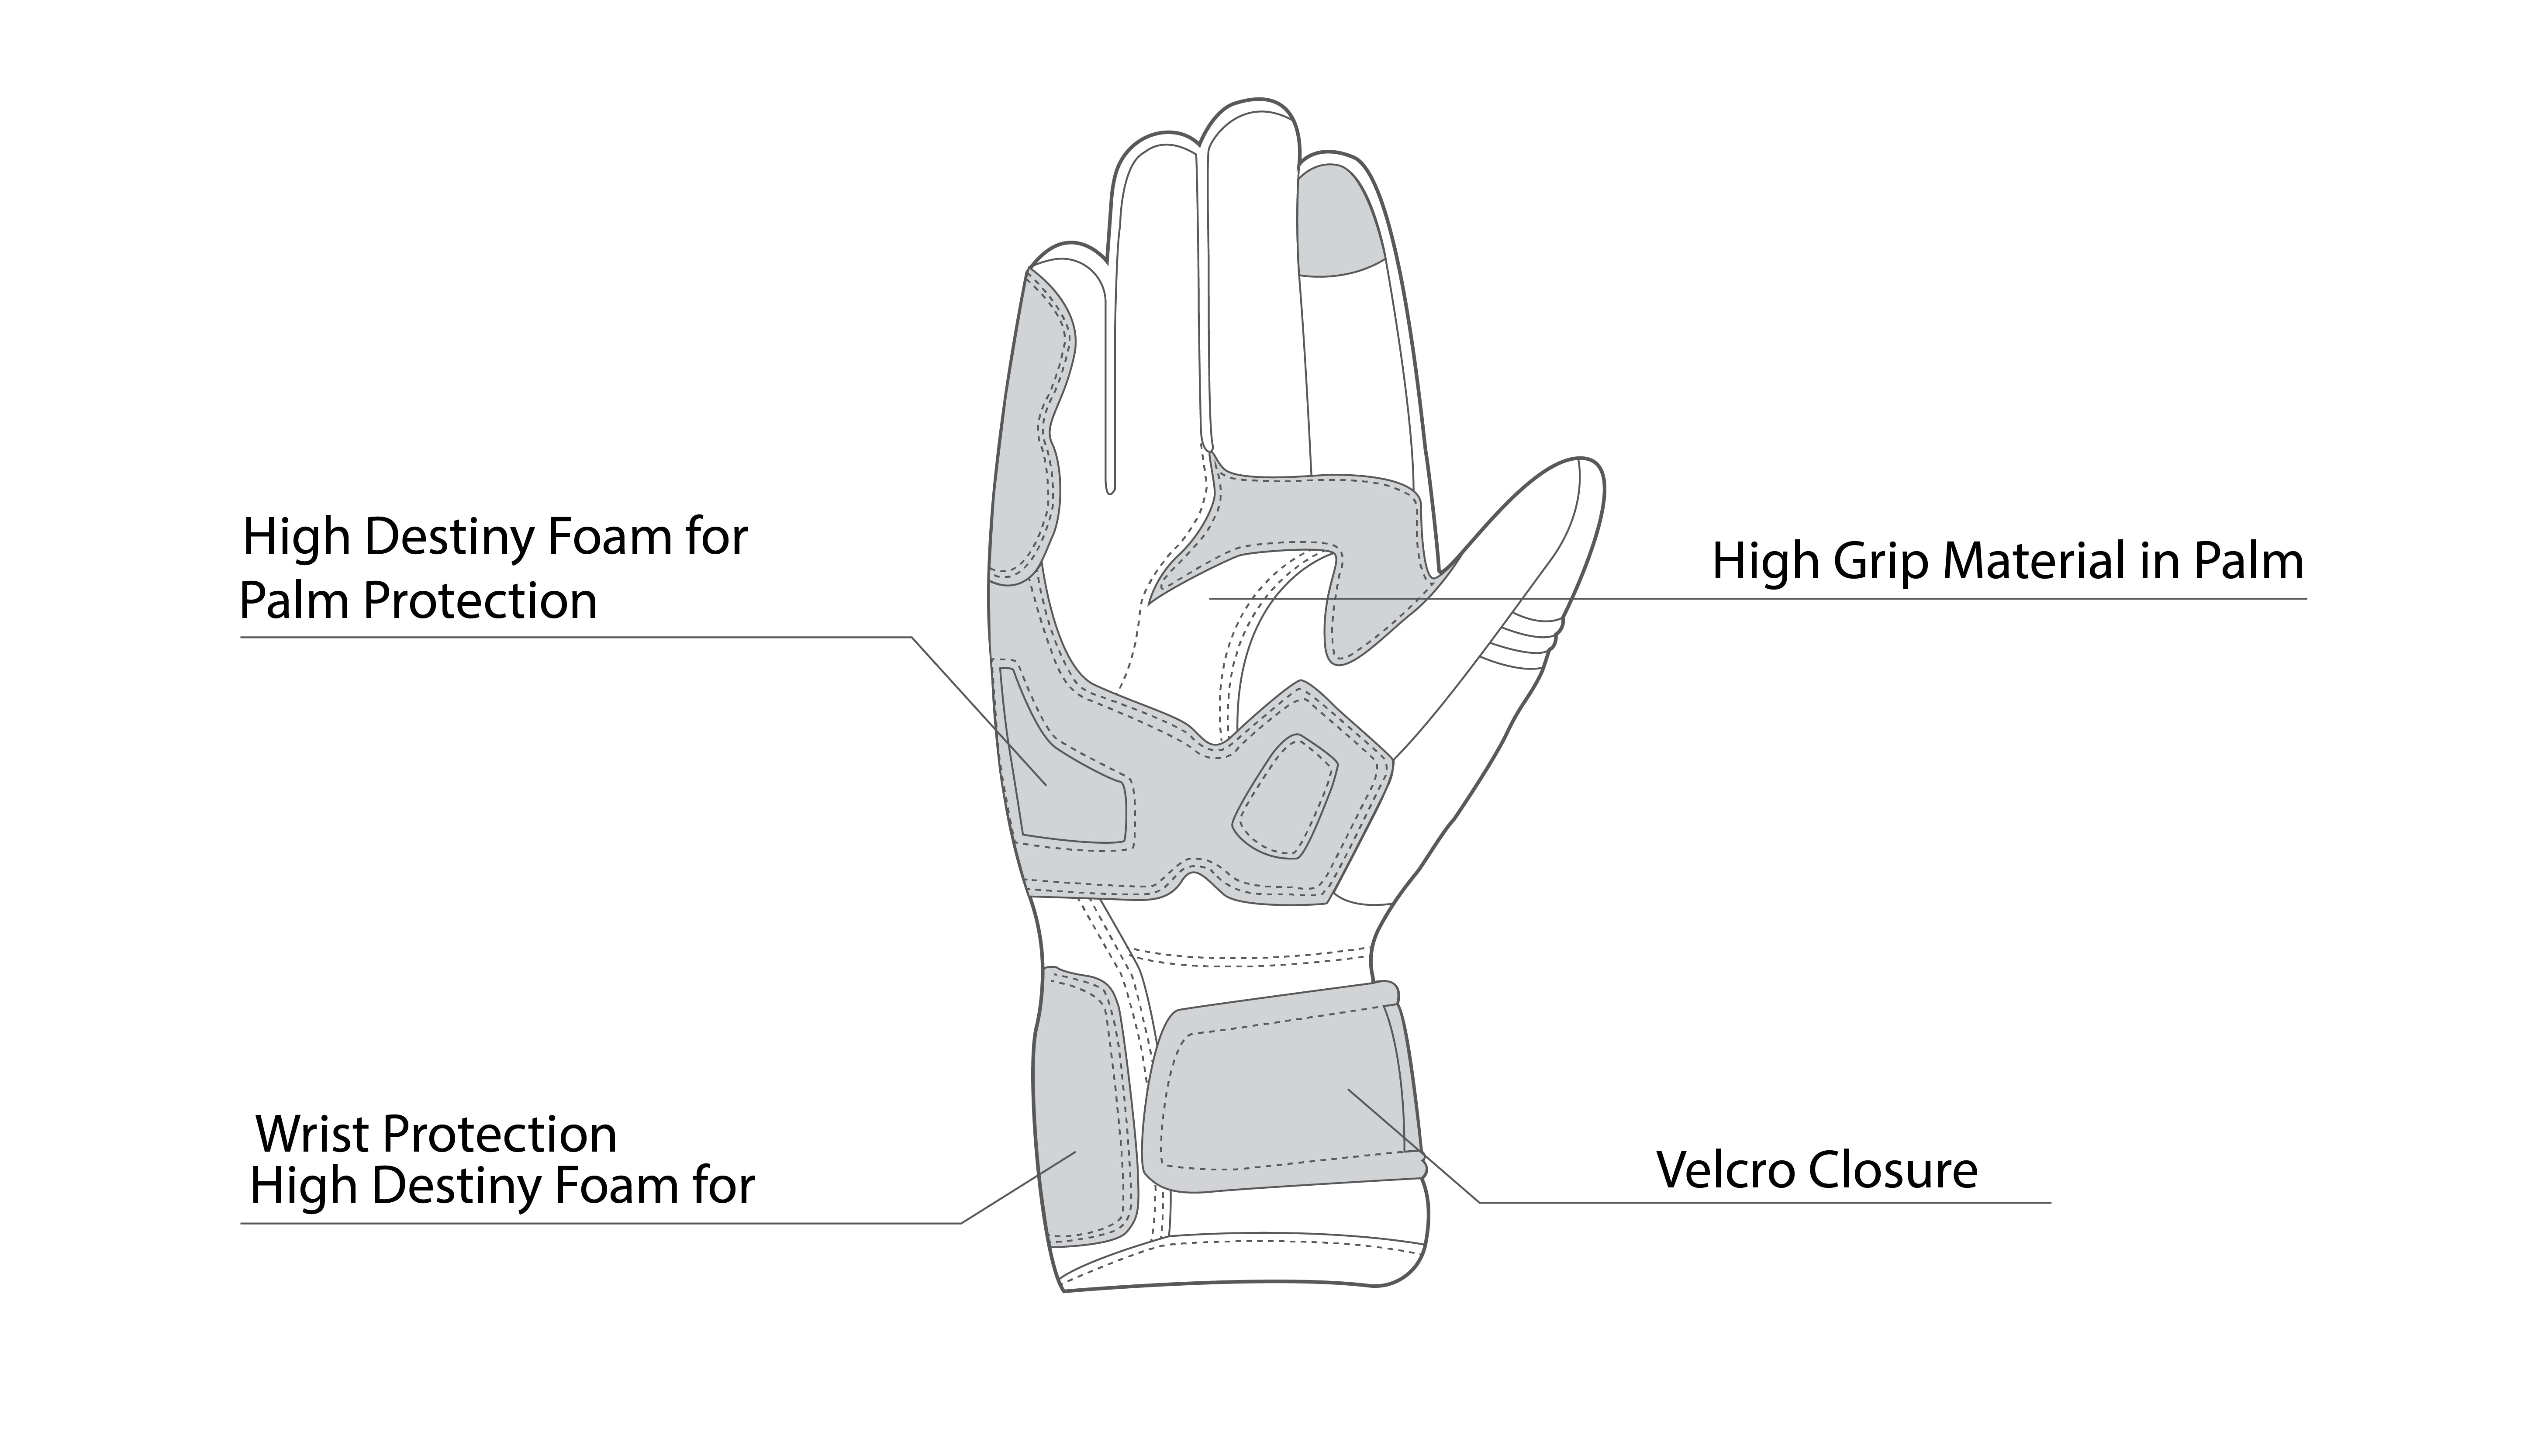 infographic sketch bela ice winter wp black and gray gloves front side view